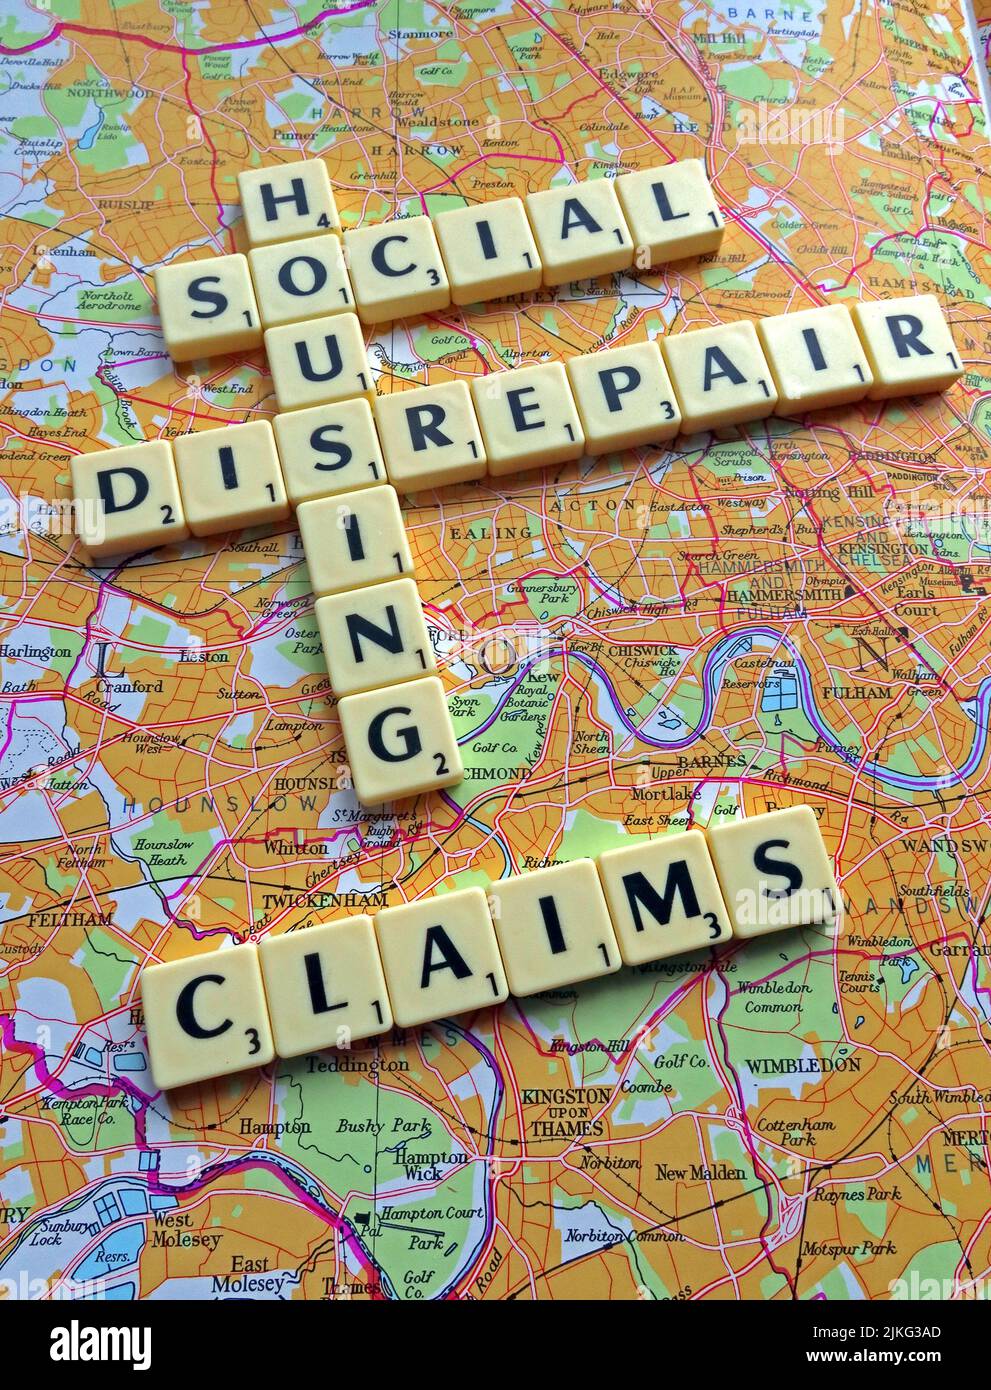 SocialHousing / Council Housing Disrepair problems with responsive repairs spelled out in Scrabble letters on a map Stock Photo